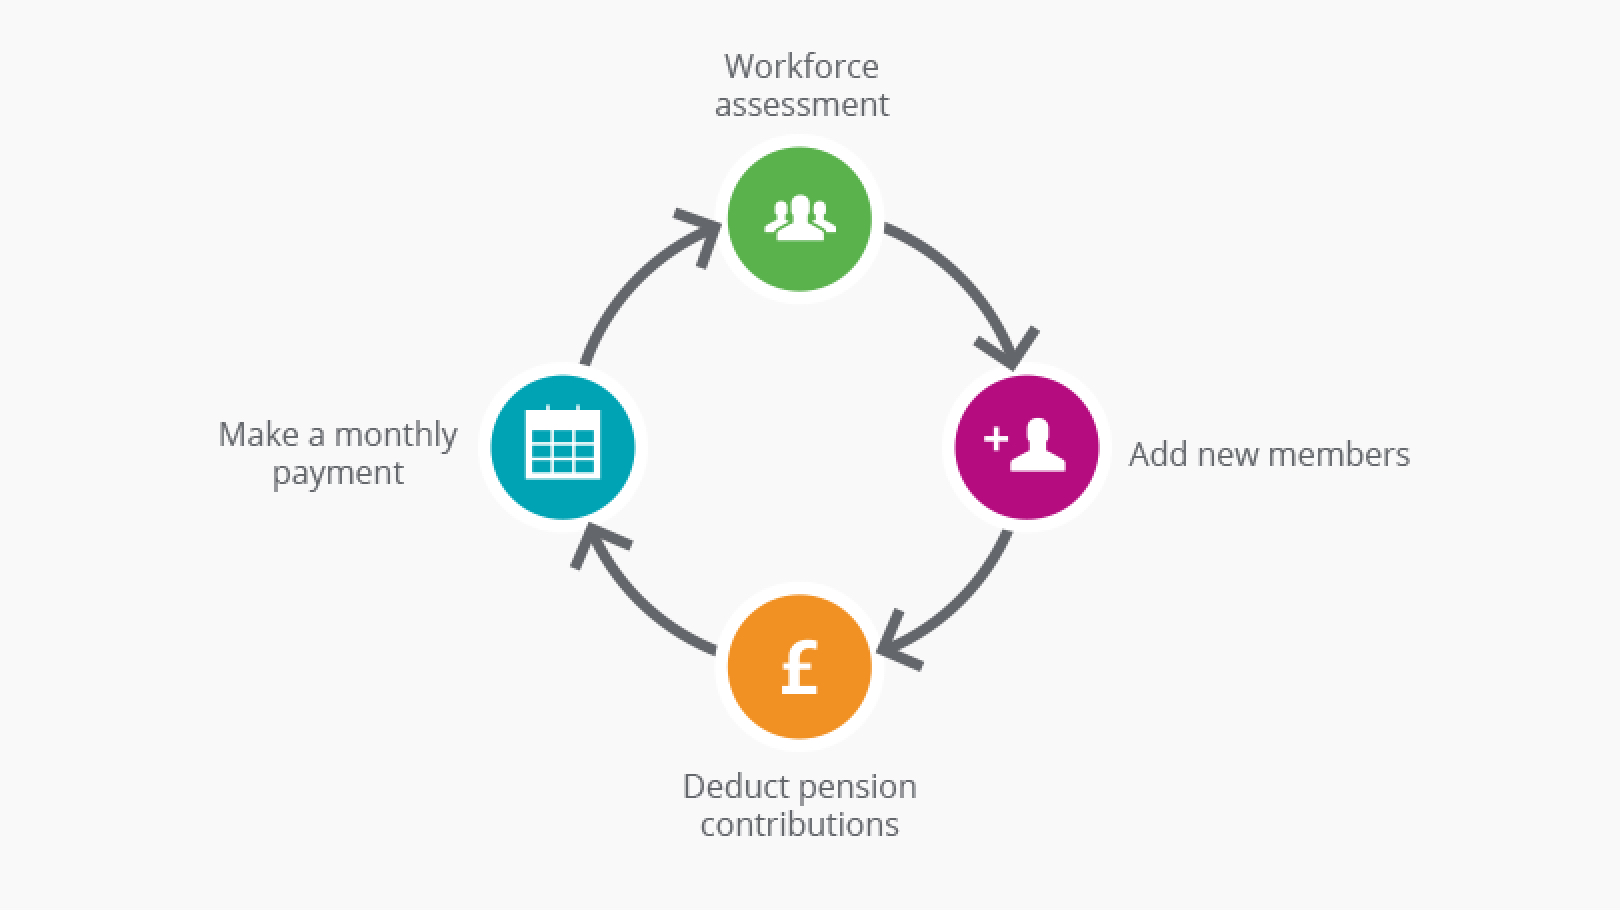 Monthly responsibilities follow a cyclical pattern. First, Complete your workforce assessment, then add new members to the pension scheme, deduct pension contributions from salary and finally make a monthly payment into the pension scheme